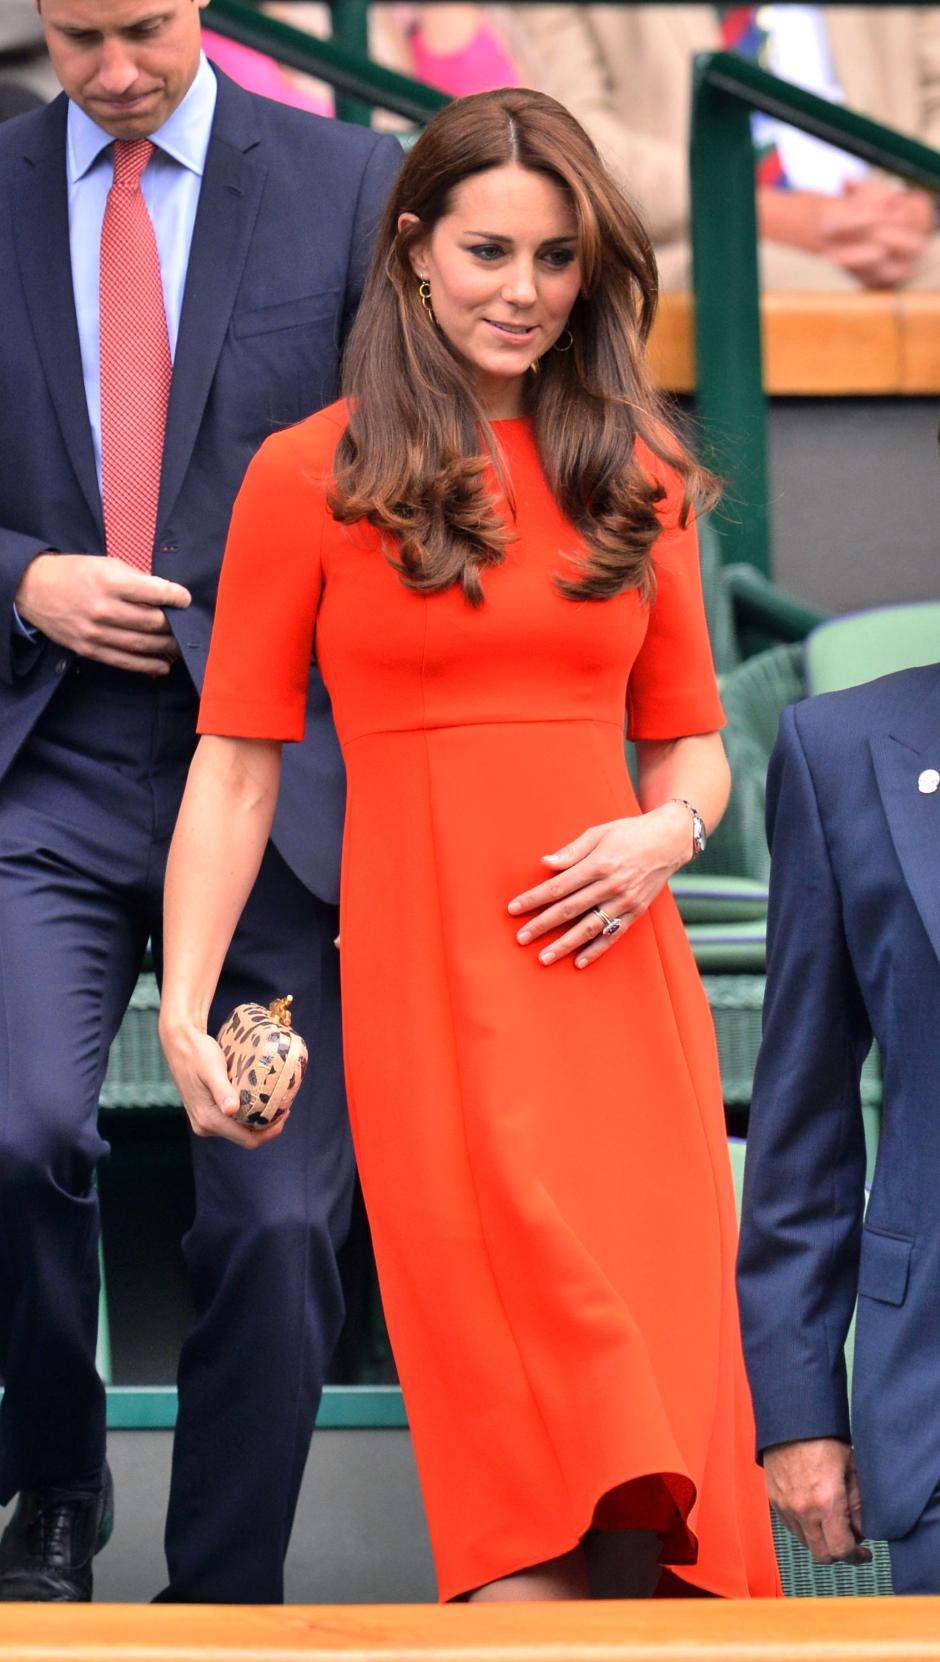 Catherine Duchess of Cambridge in the Royal Box
Wimbledon Tennis Championships, Day 12, The All England Lawn Tennis and Croquet Club, London, UK - 14 Jul 2018
Wearing Jenny Packham